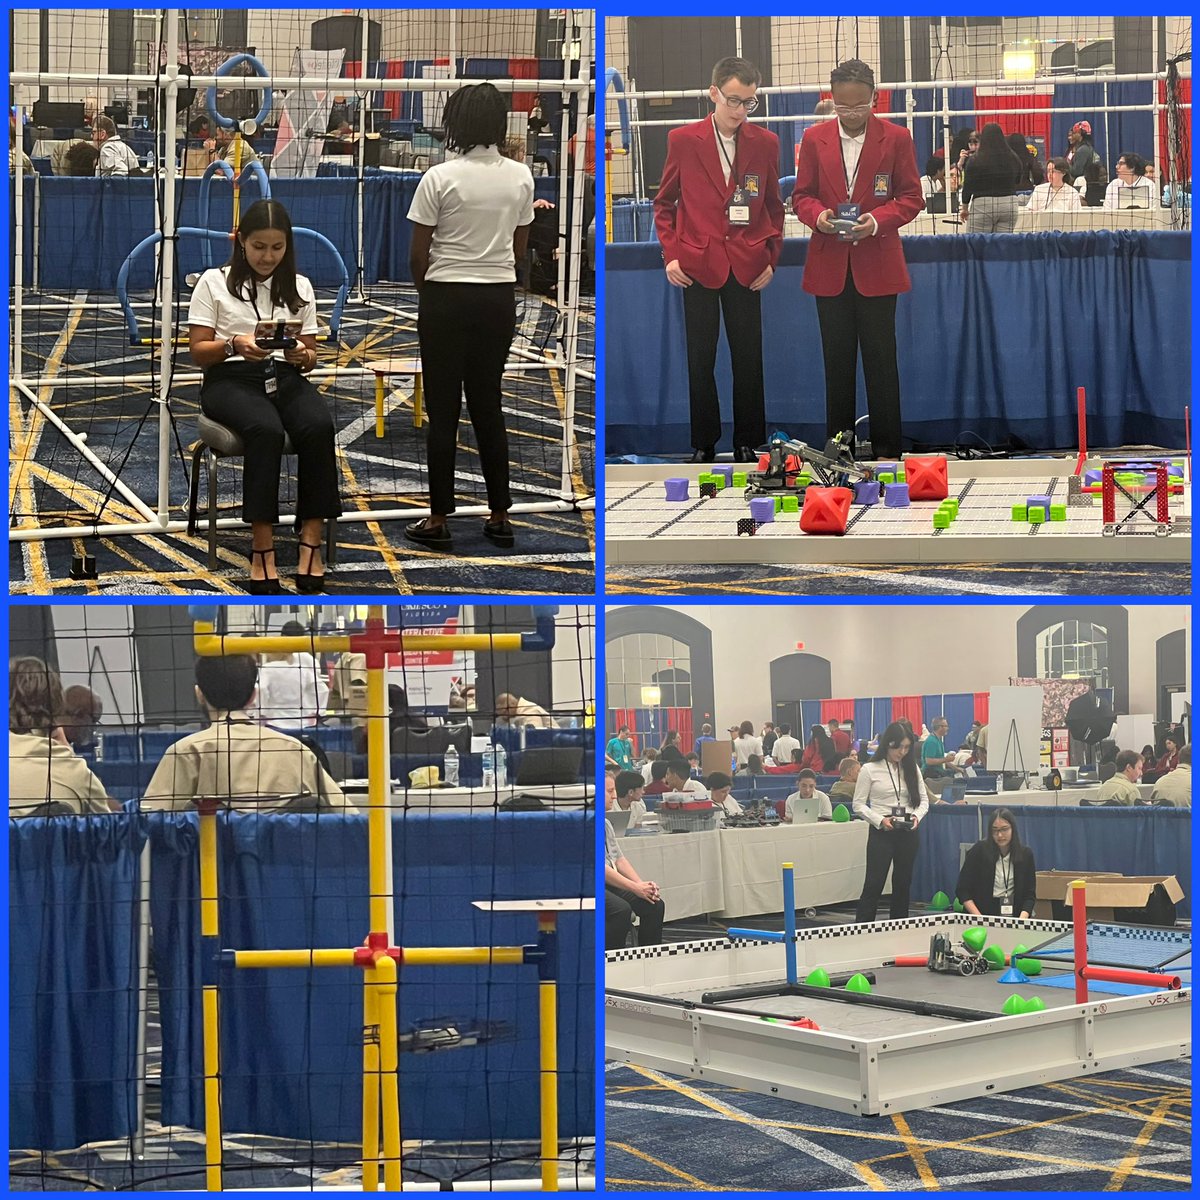 Day 2 at Skills USA was packed with talent and dedication! 🌟 Our Broward Schools students rocked every competition, showcasing excellence at its finest. 🏆 Keep shining, team! #SkillsUSA #BrowardSchools #Talent #Dedication#BrowardCTE @msformoso @Reg5SkillsUSAFL @BrowardCTE